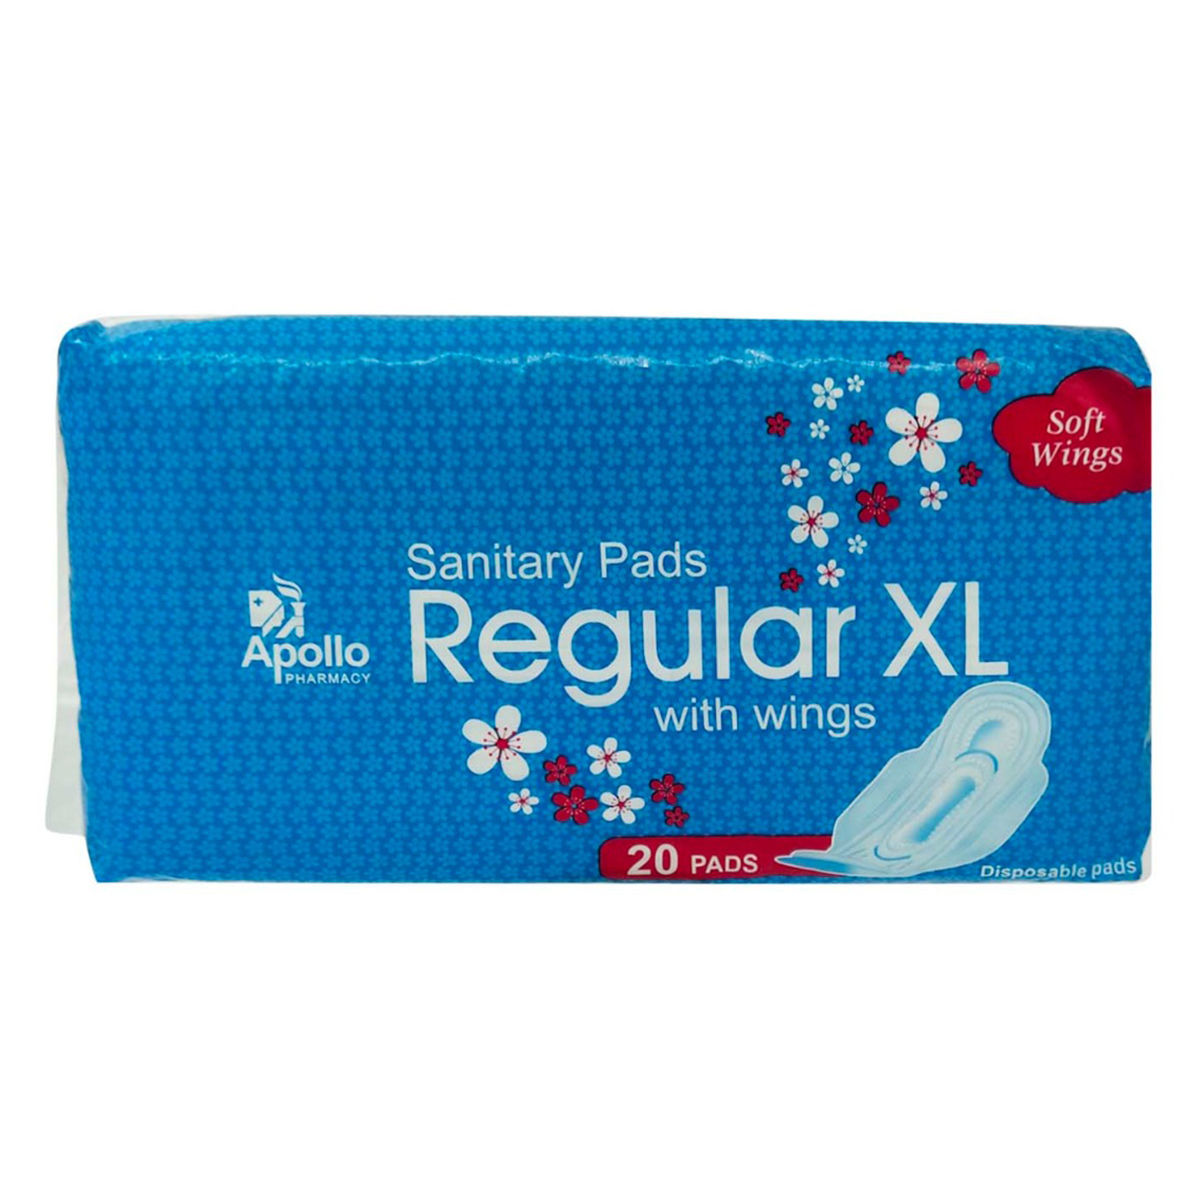 Apollo Pharmacy Regular Sanitary Pads XL, 20 Count, Pack of 1 